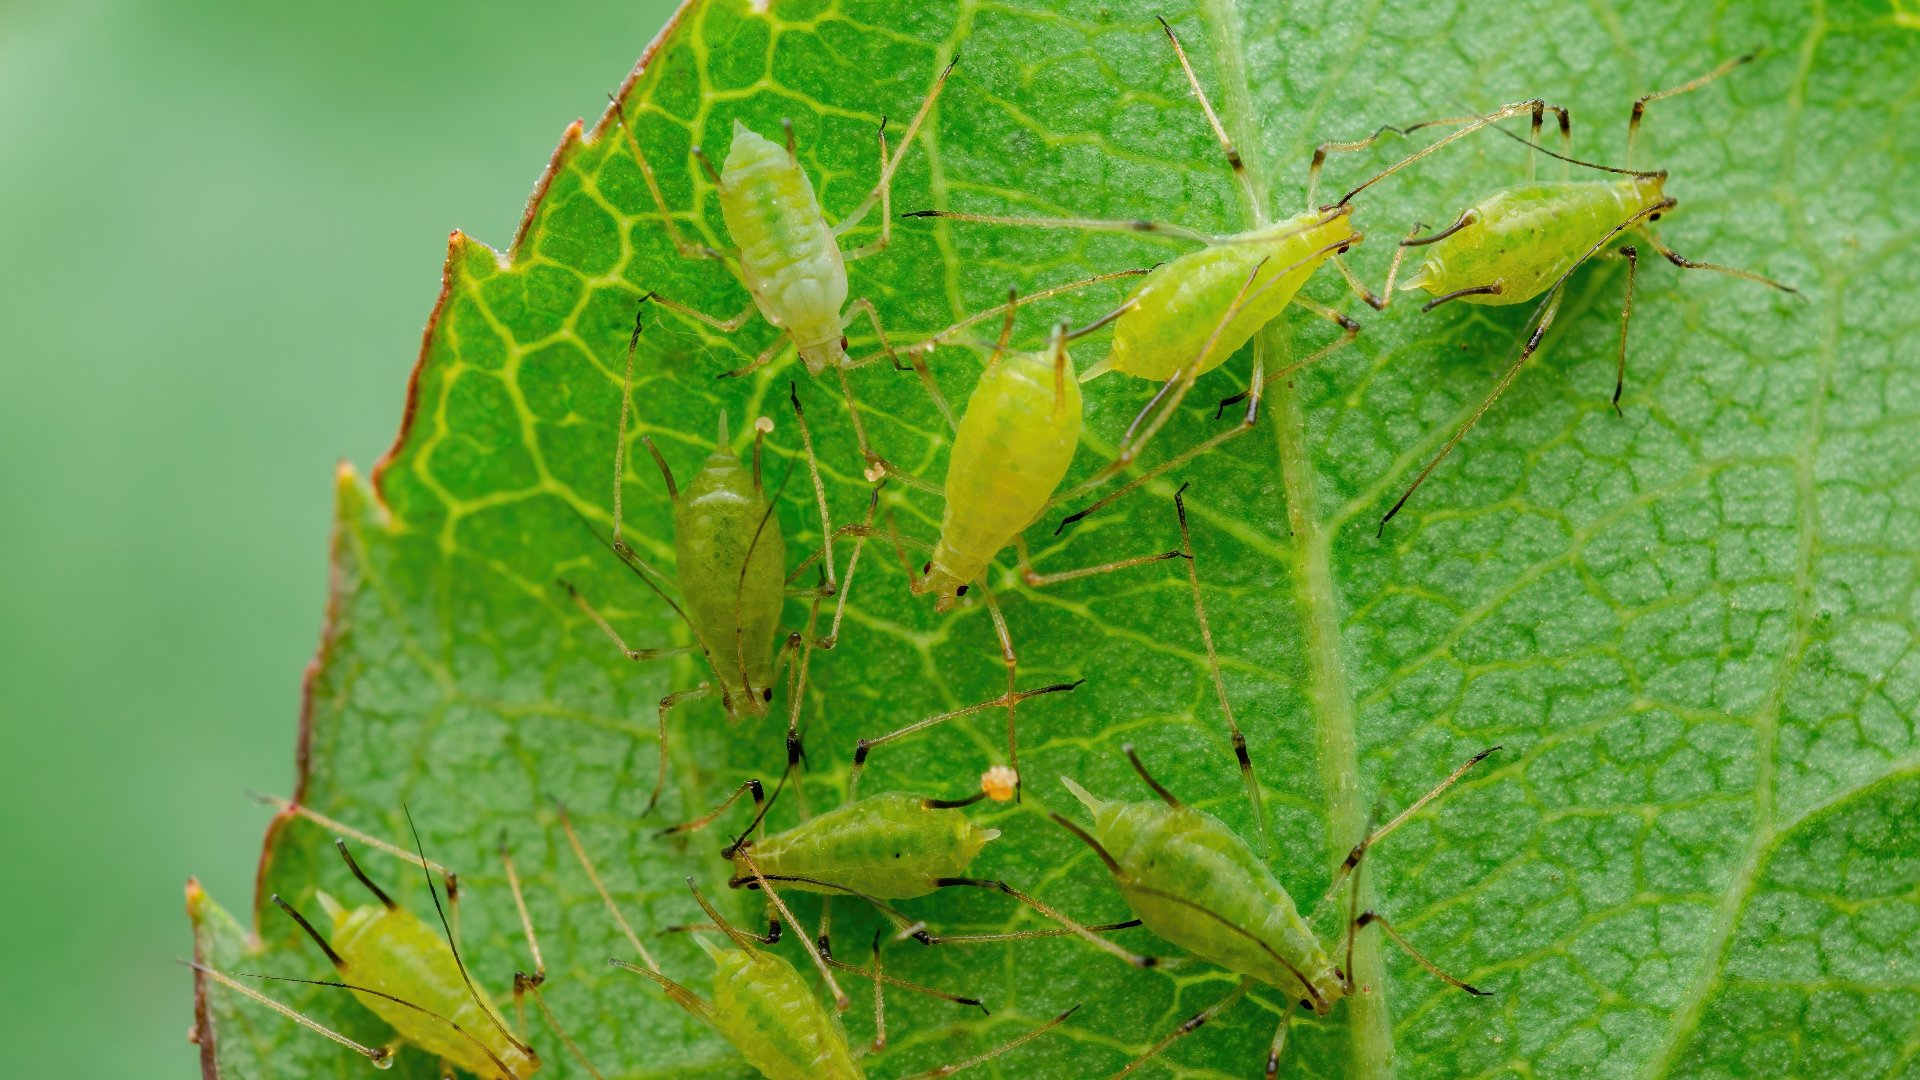 Aphids - What Are These Insects & What Kind of Plant Damage Can They Cause?